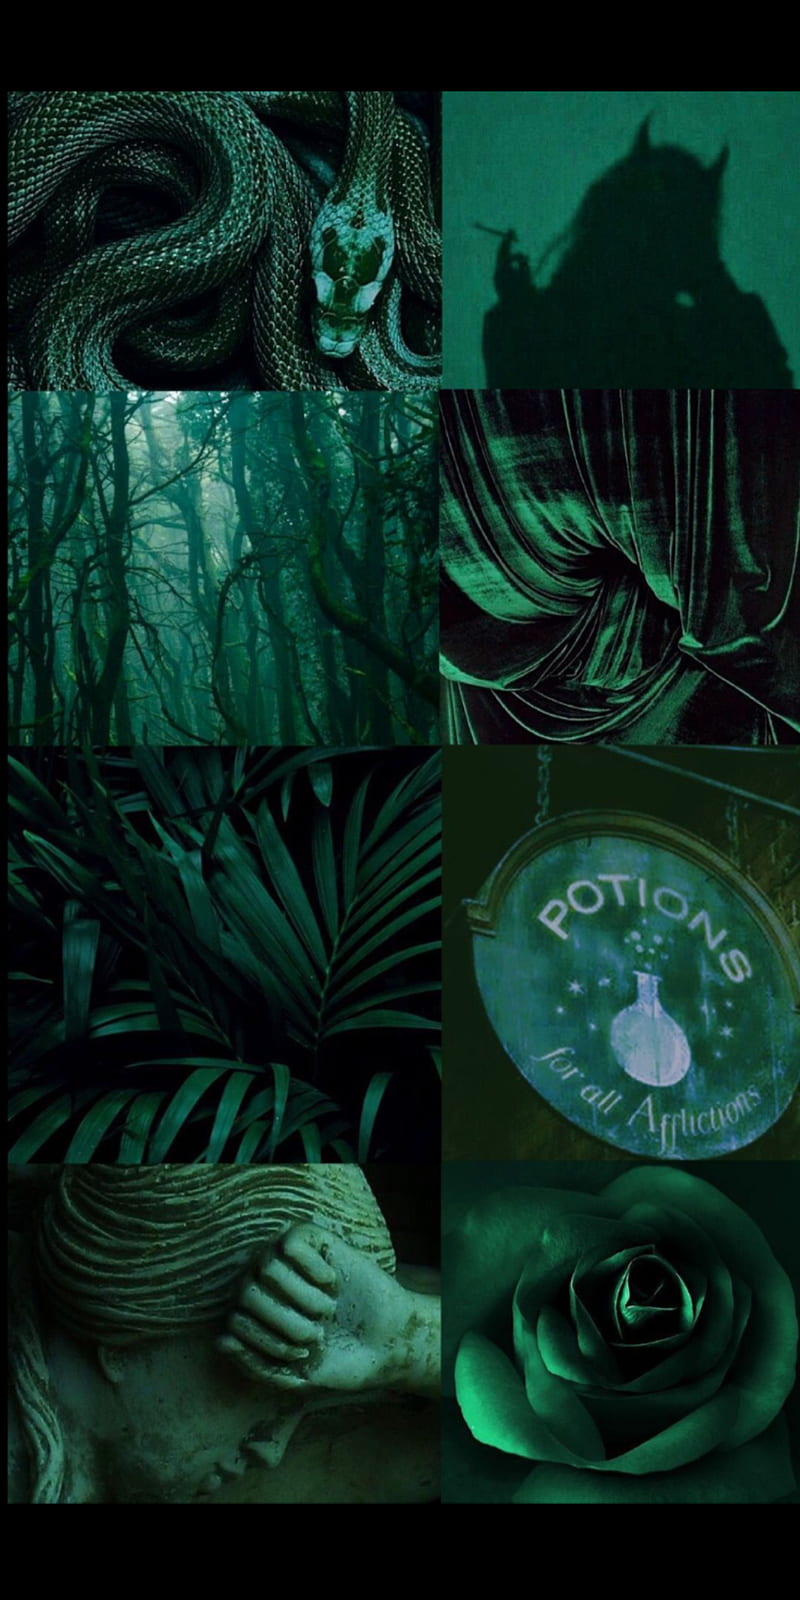 Aesthetic background of green with pictures of a snake, a forest, a spell book, a rose, and a silhouette of a castle. - Slytherin